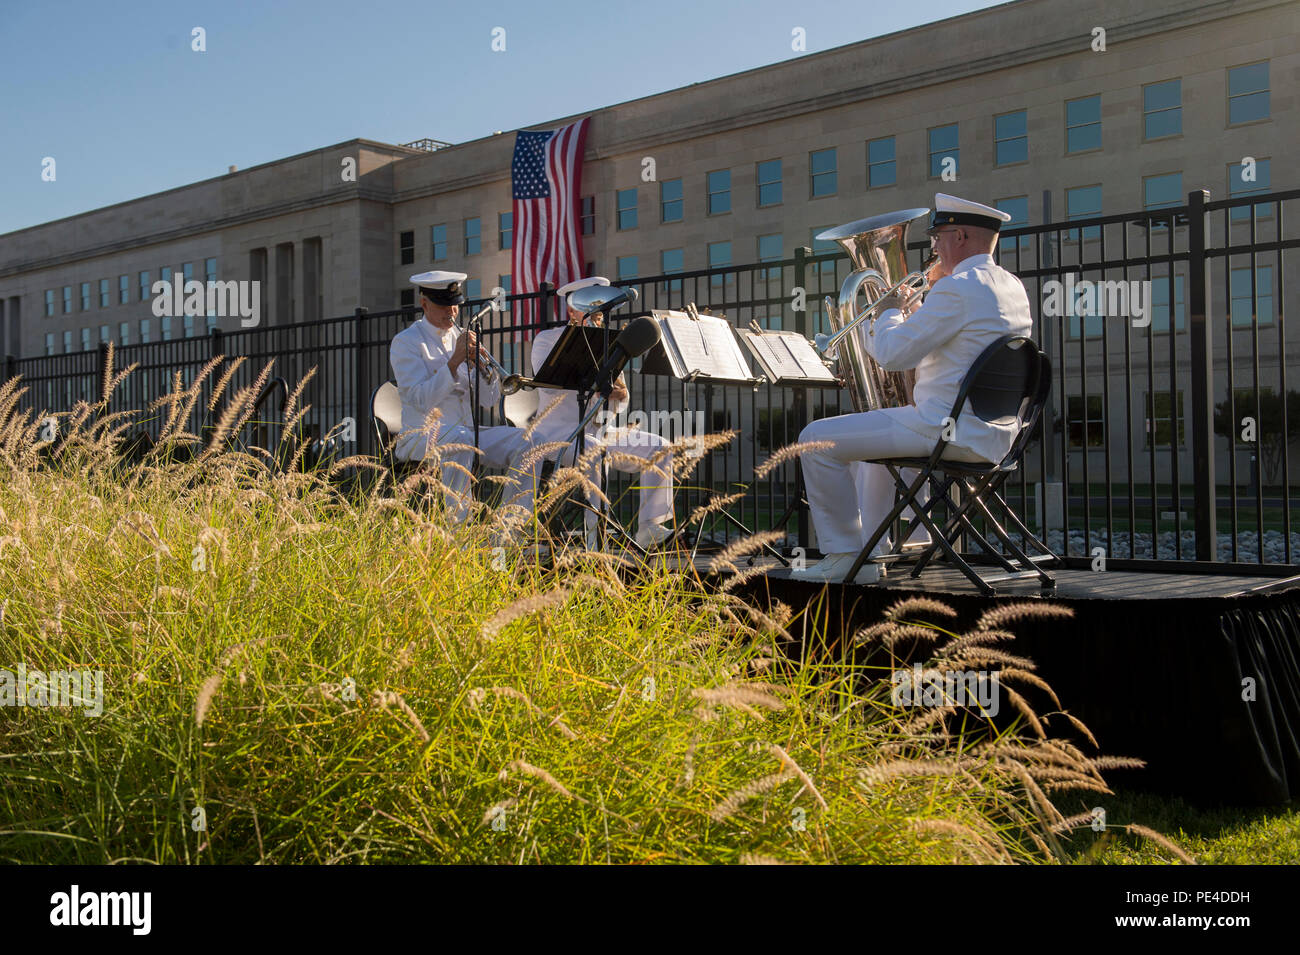 A Navy band plays music as Defense Secretary Ash Carter and Air Force Gen. Paul Selva, vice chairman of the Joint Chiefs of Staff, host a remembrance ceremony Sept. 11, 2015, at the Pentagon Memorial to honor the memory of those killed in the 9/11 terrorist attack. The ceremony was attended by family members who lost loved ones. (DoD photo by Senior Master Sgt. Adrian Cadiz)(Released) Stock Photo